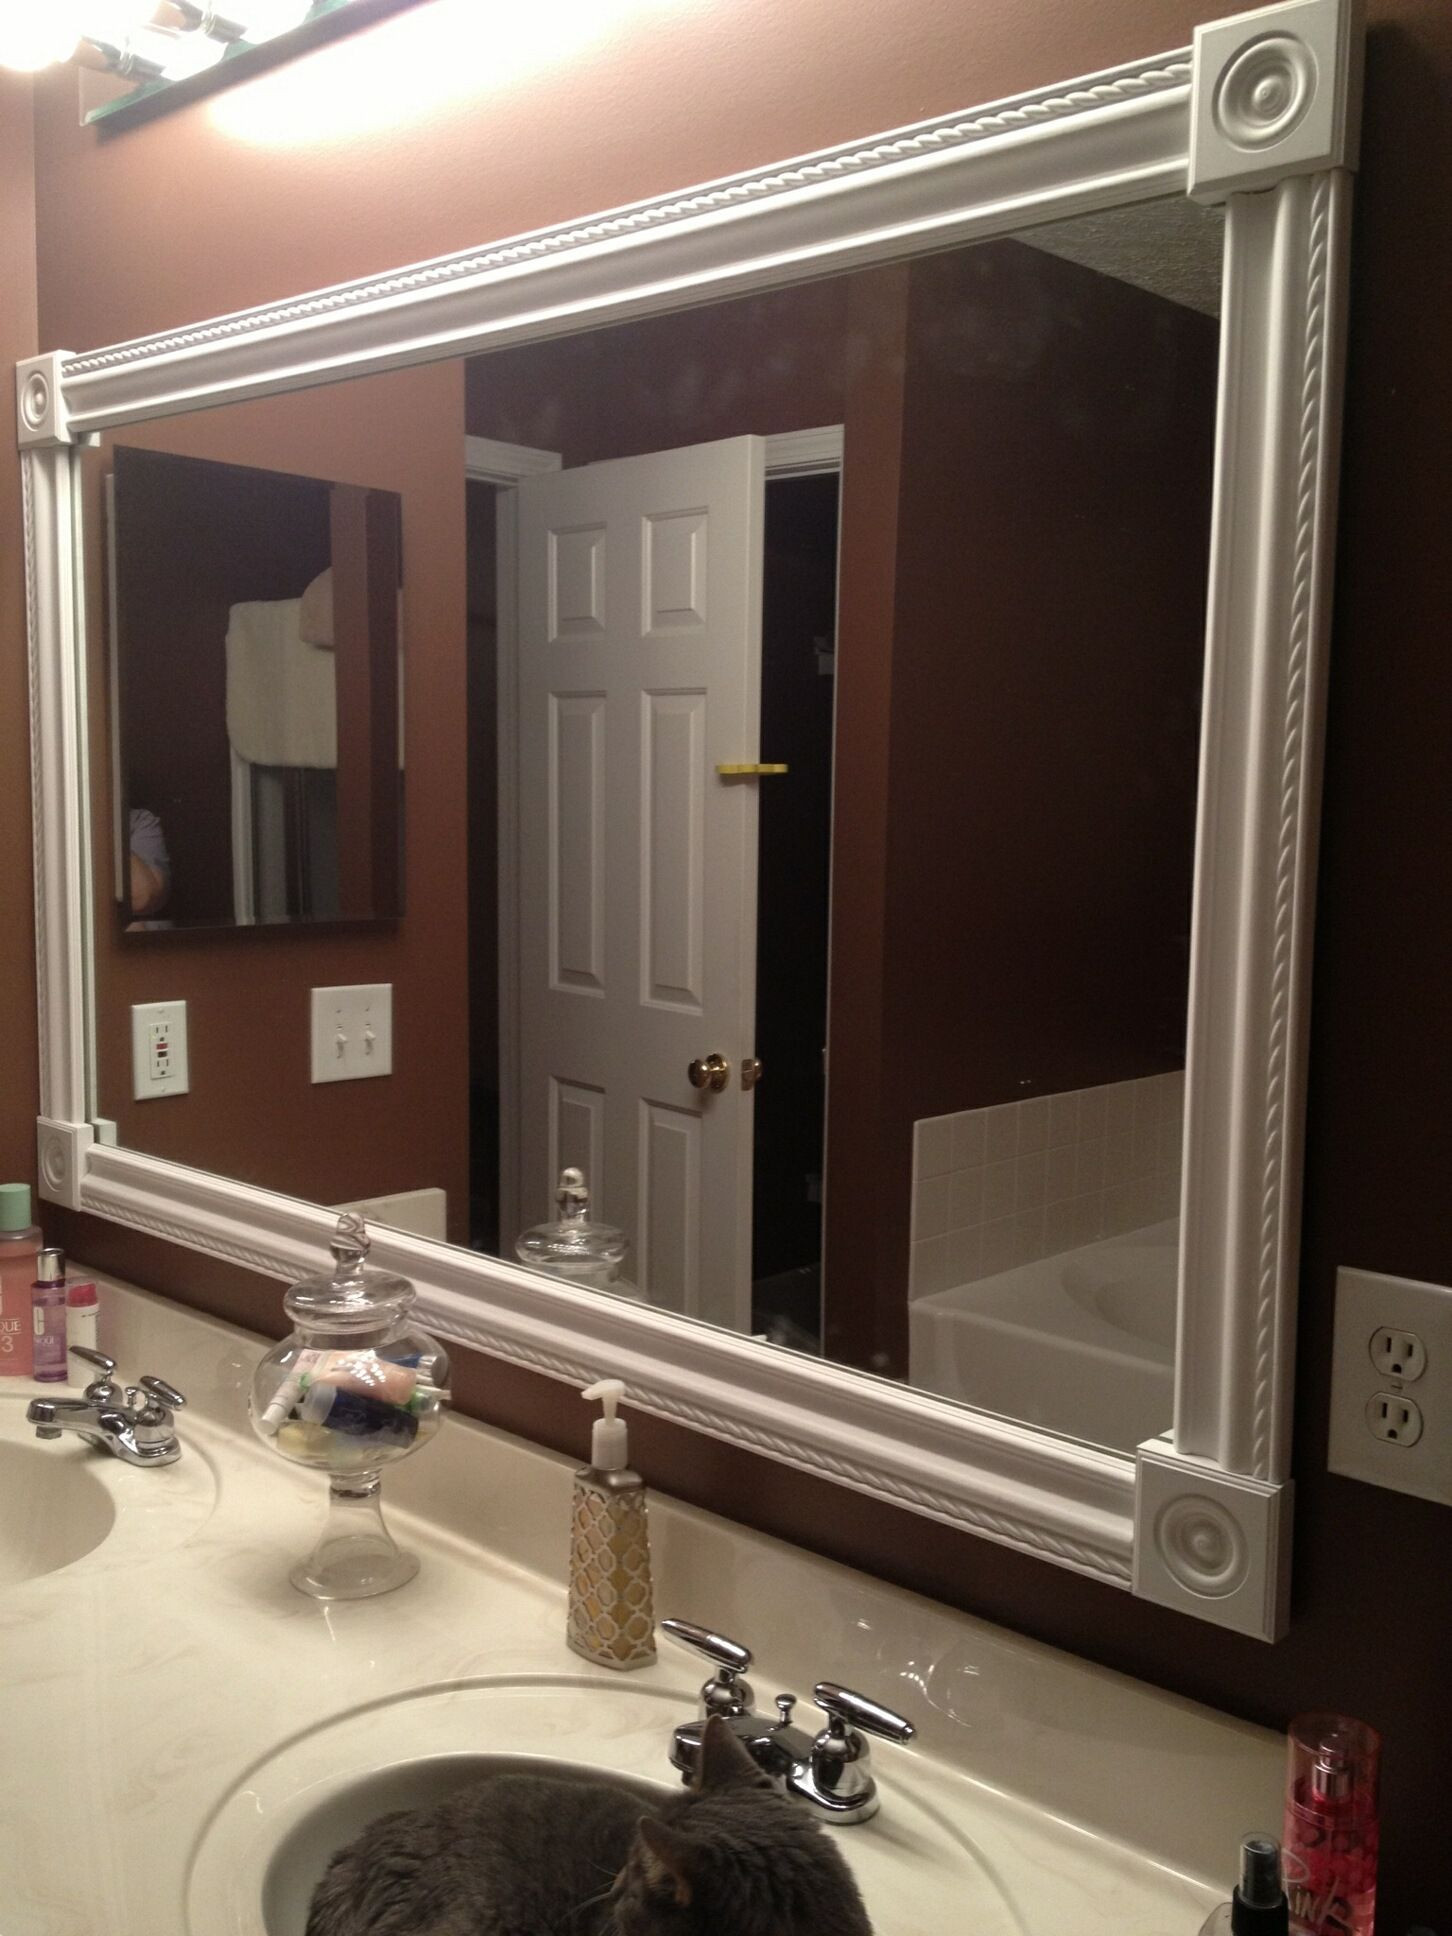 Large Framed Mirrors For Bathroom
 Tips to Choose a Bathroom Mirror